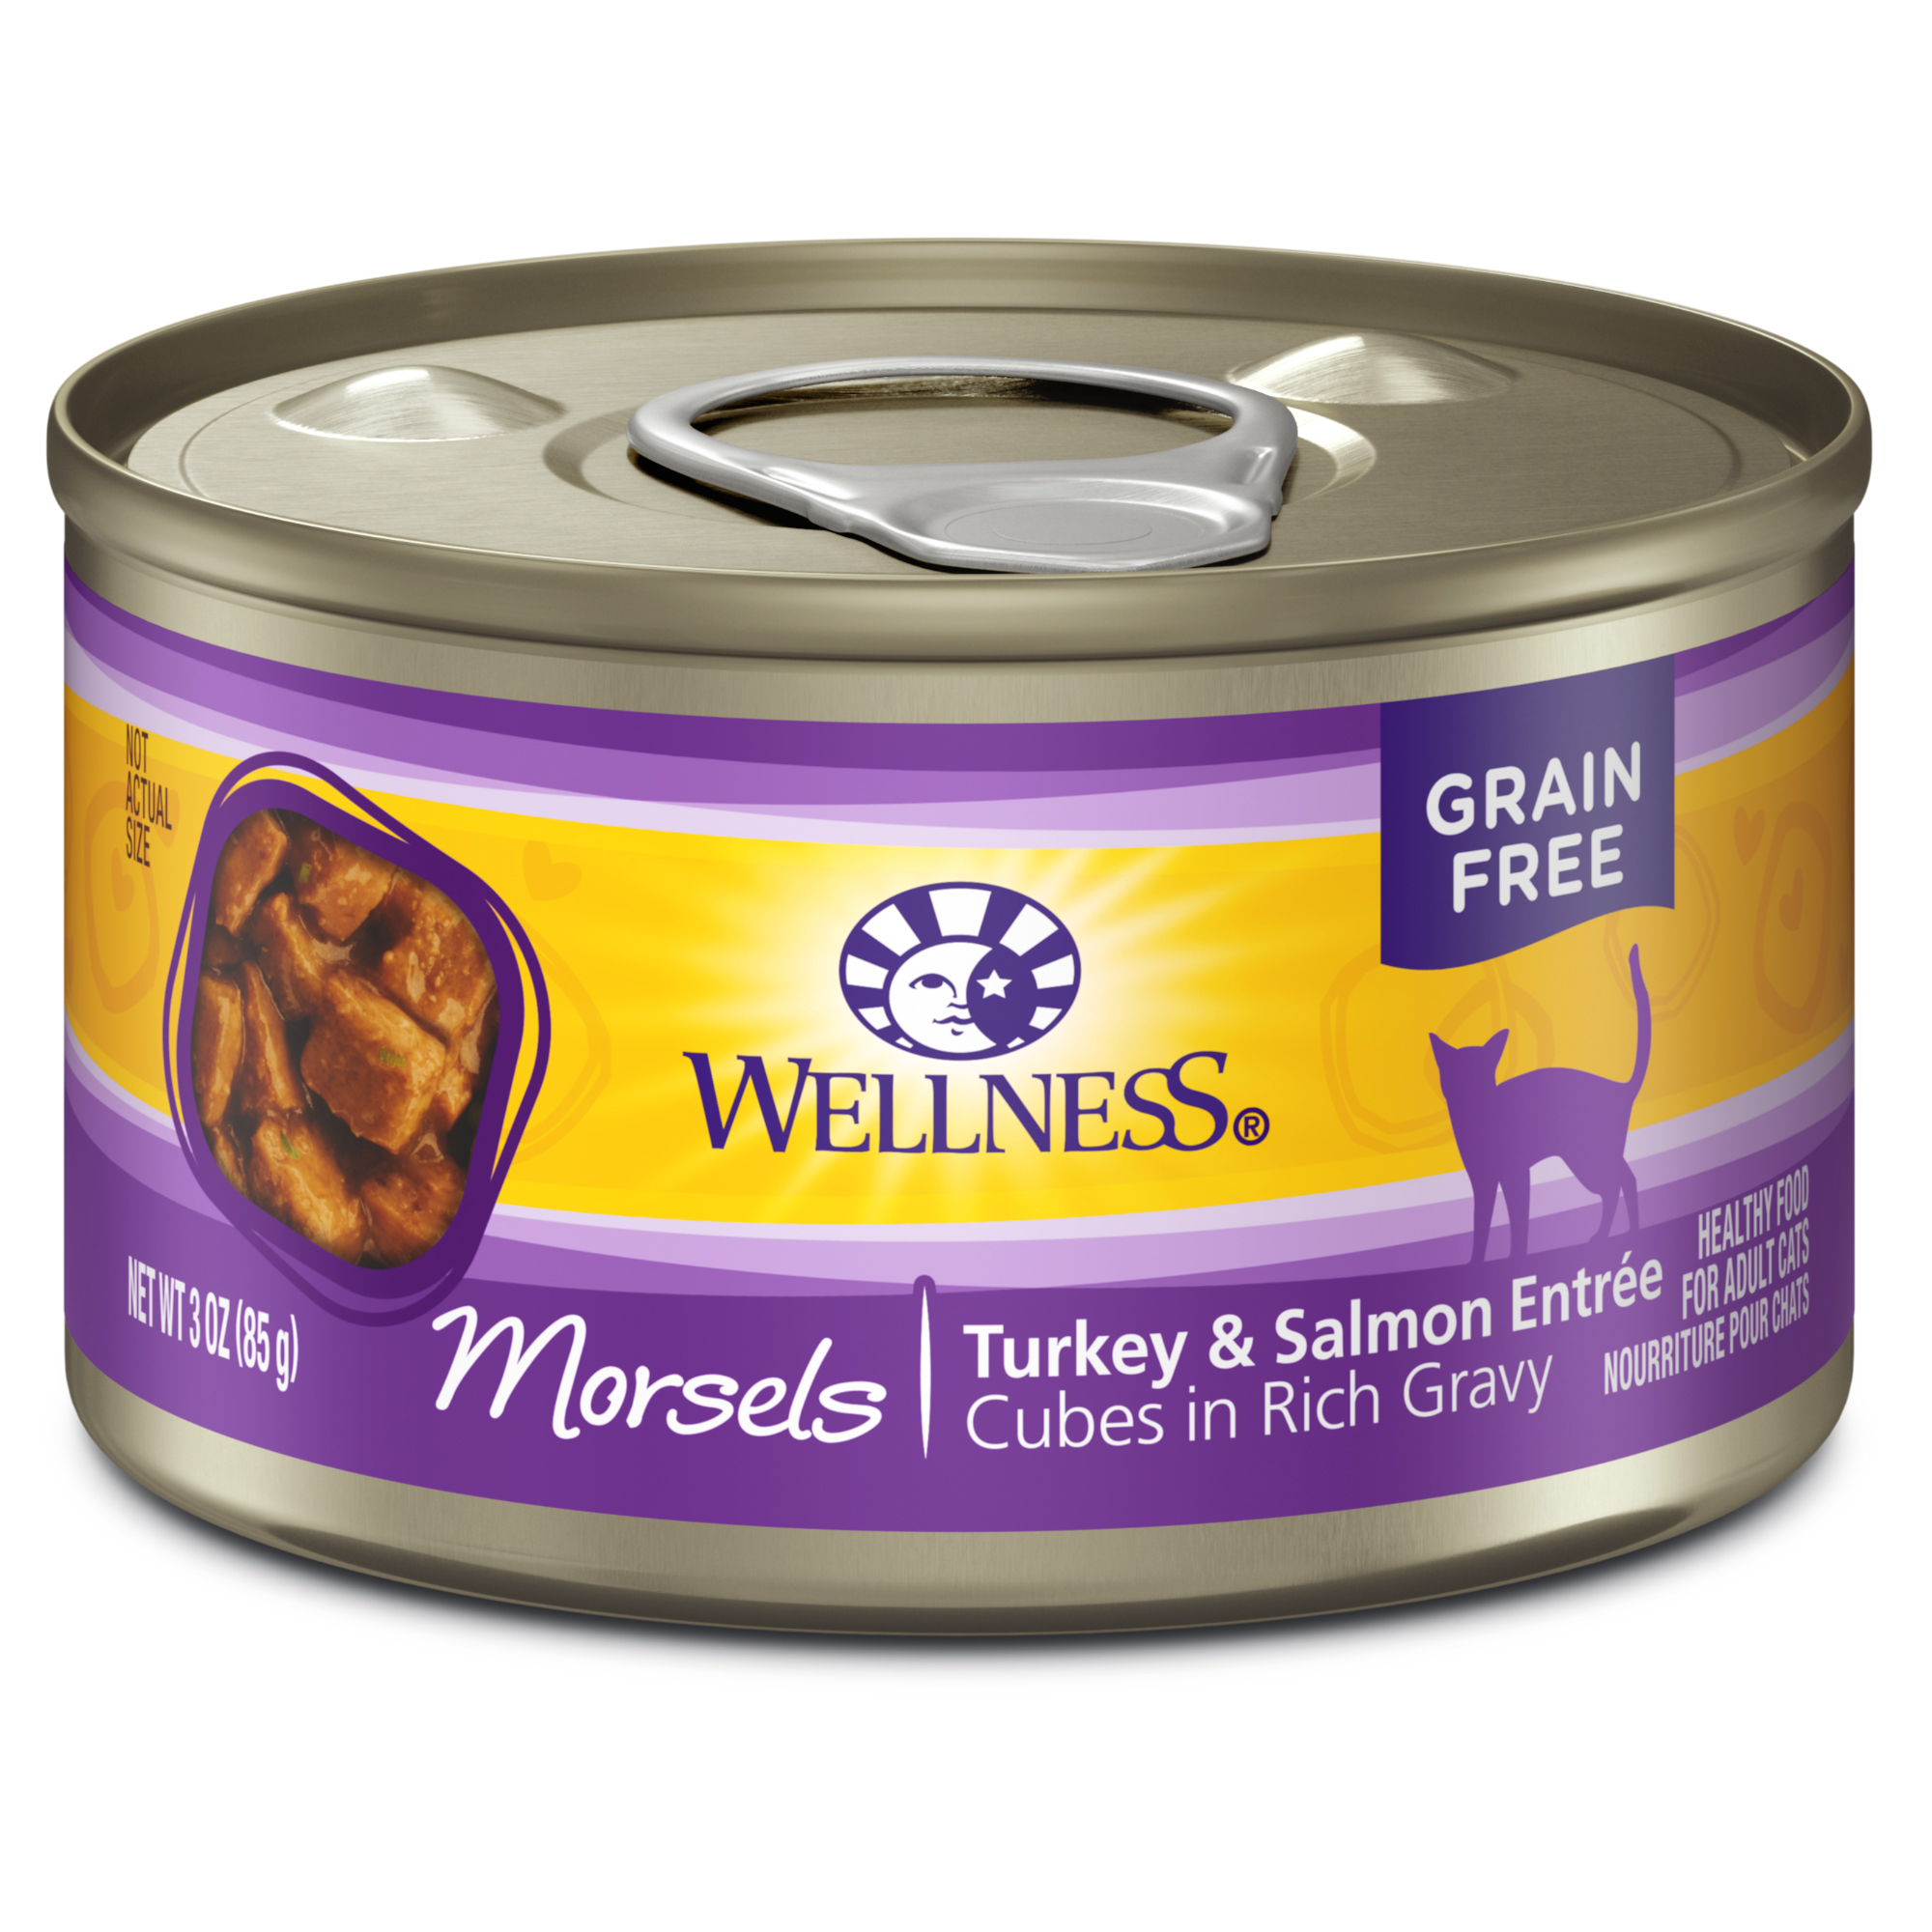 Wellness Complete Health Natural Grain Free Wet Canned Cat Food, Cubed Turkey & Salmon Entree, 3-Ounce Can (Pack of 24) - image 1 of 8